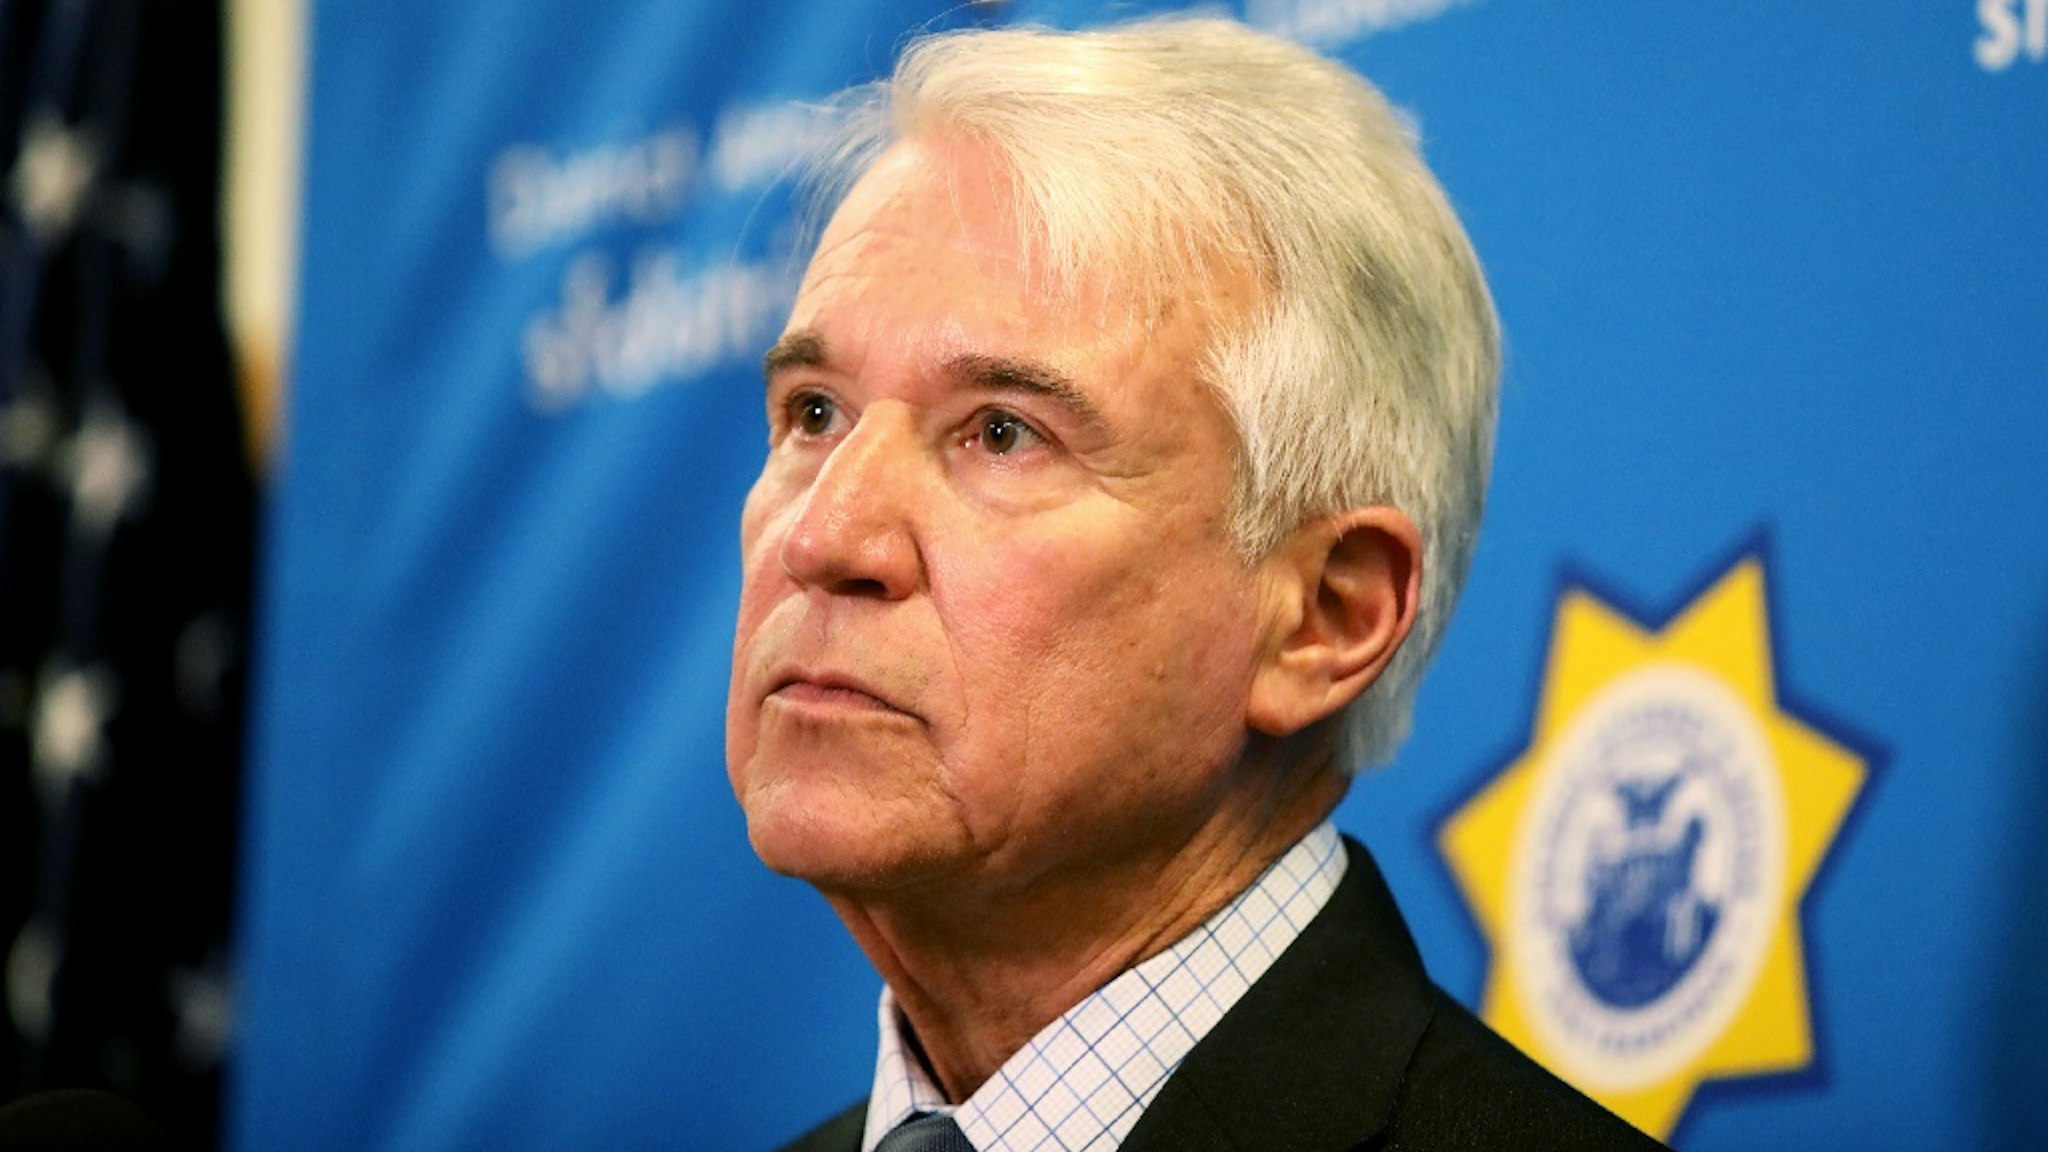 San Francisco District Attorney George Gascon listens to a speaker during a press conference at the San Francisco District Attorneys Office, in San Francisco, Calif., on Wednesday, June 12, 2019.